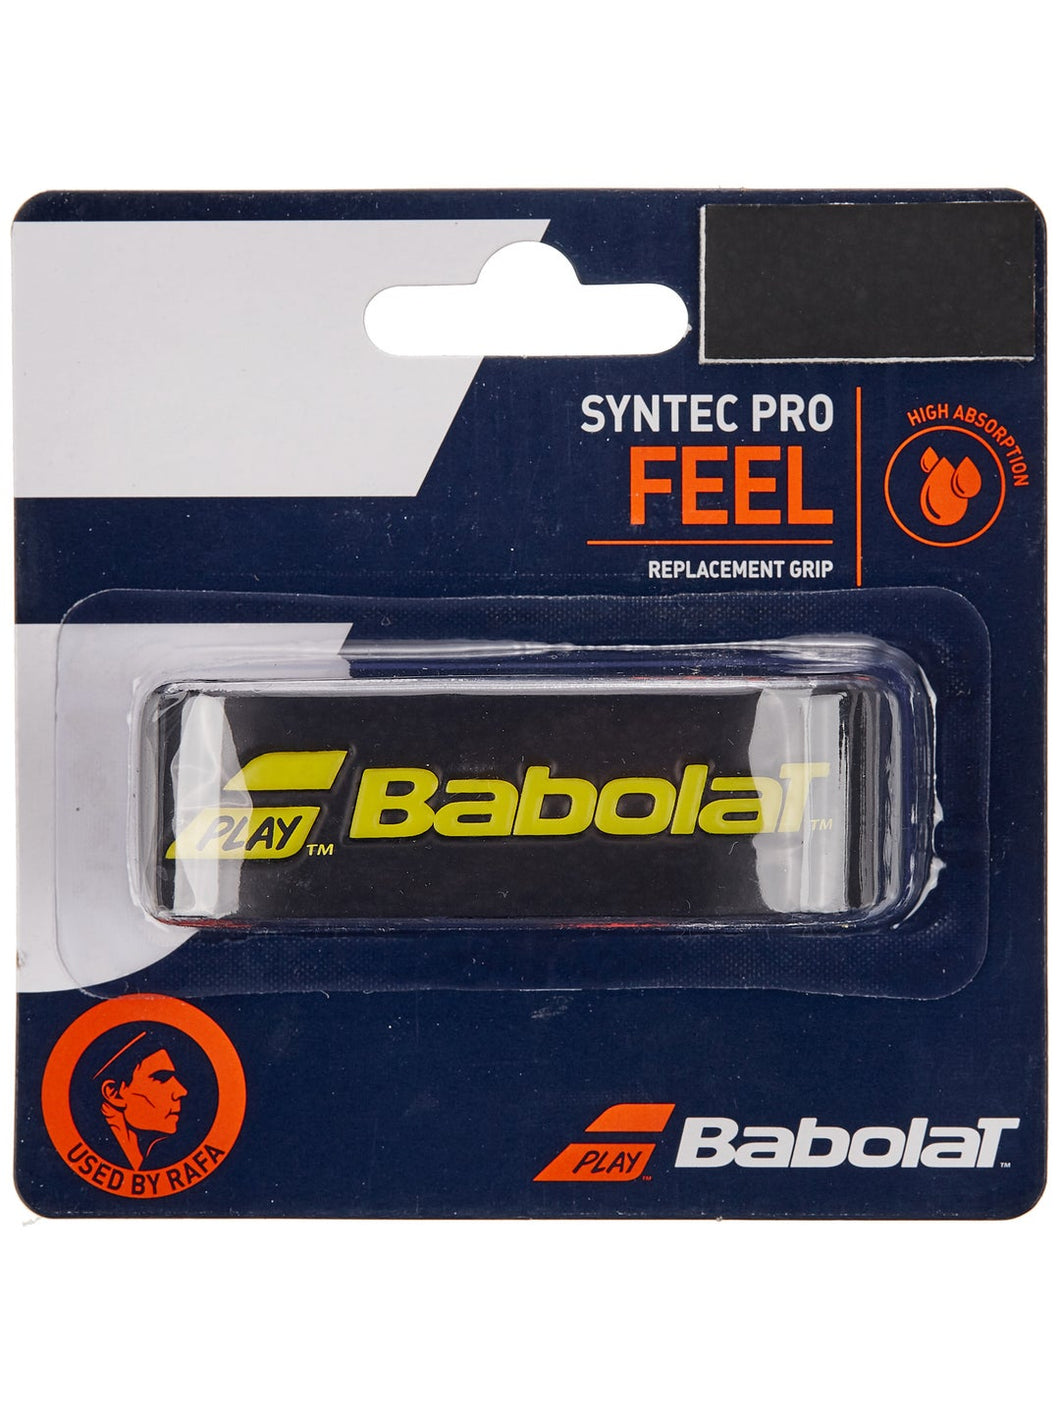 Babolat Syntec Pro Replacement Grips (Black, White or Black/Yellow)